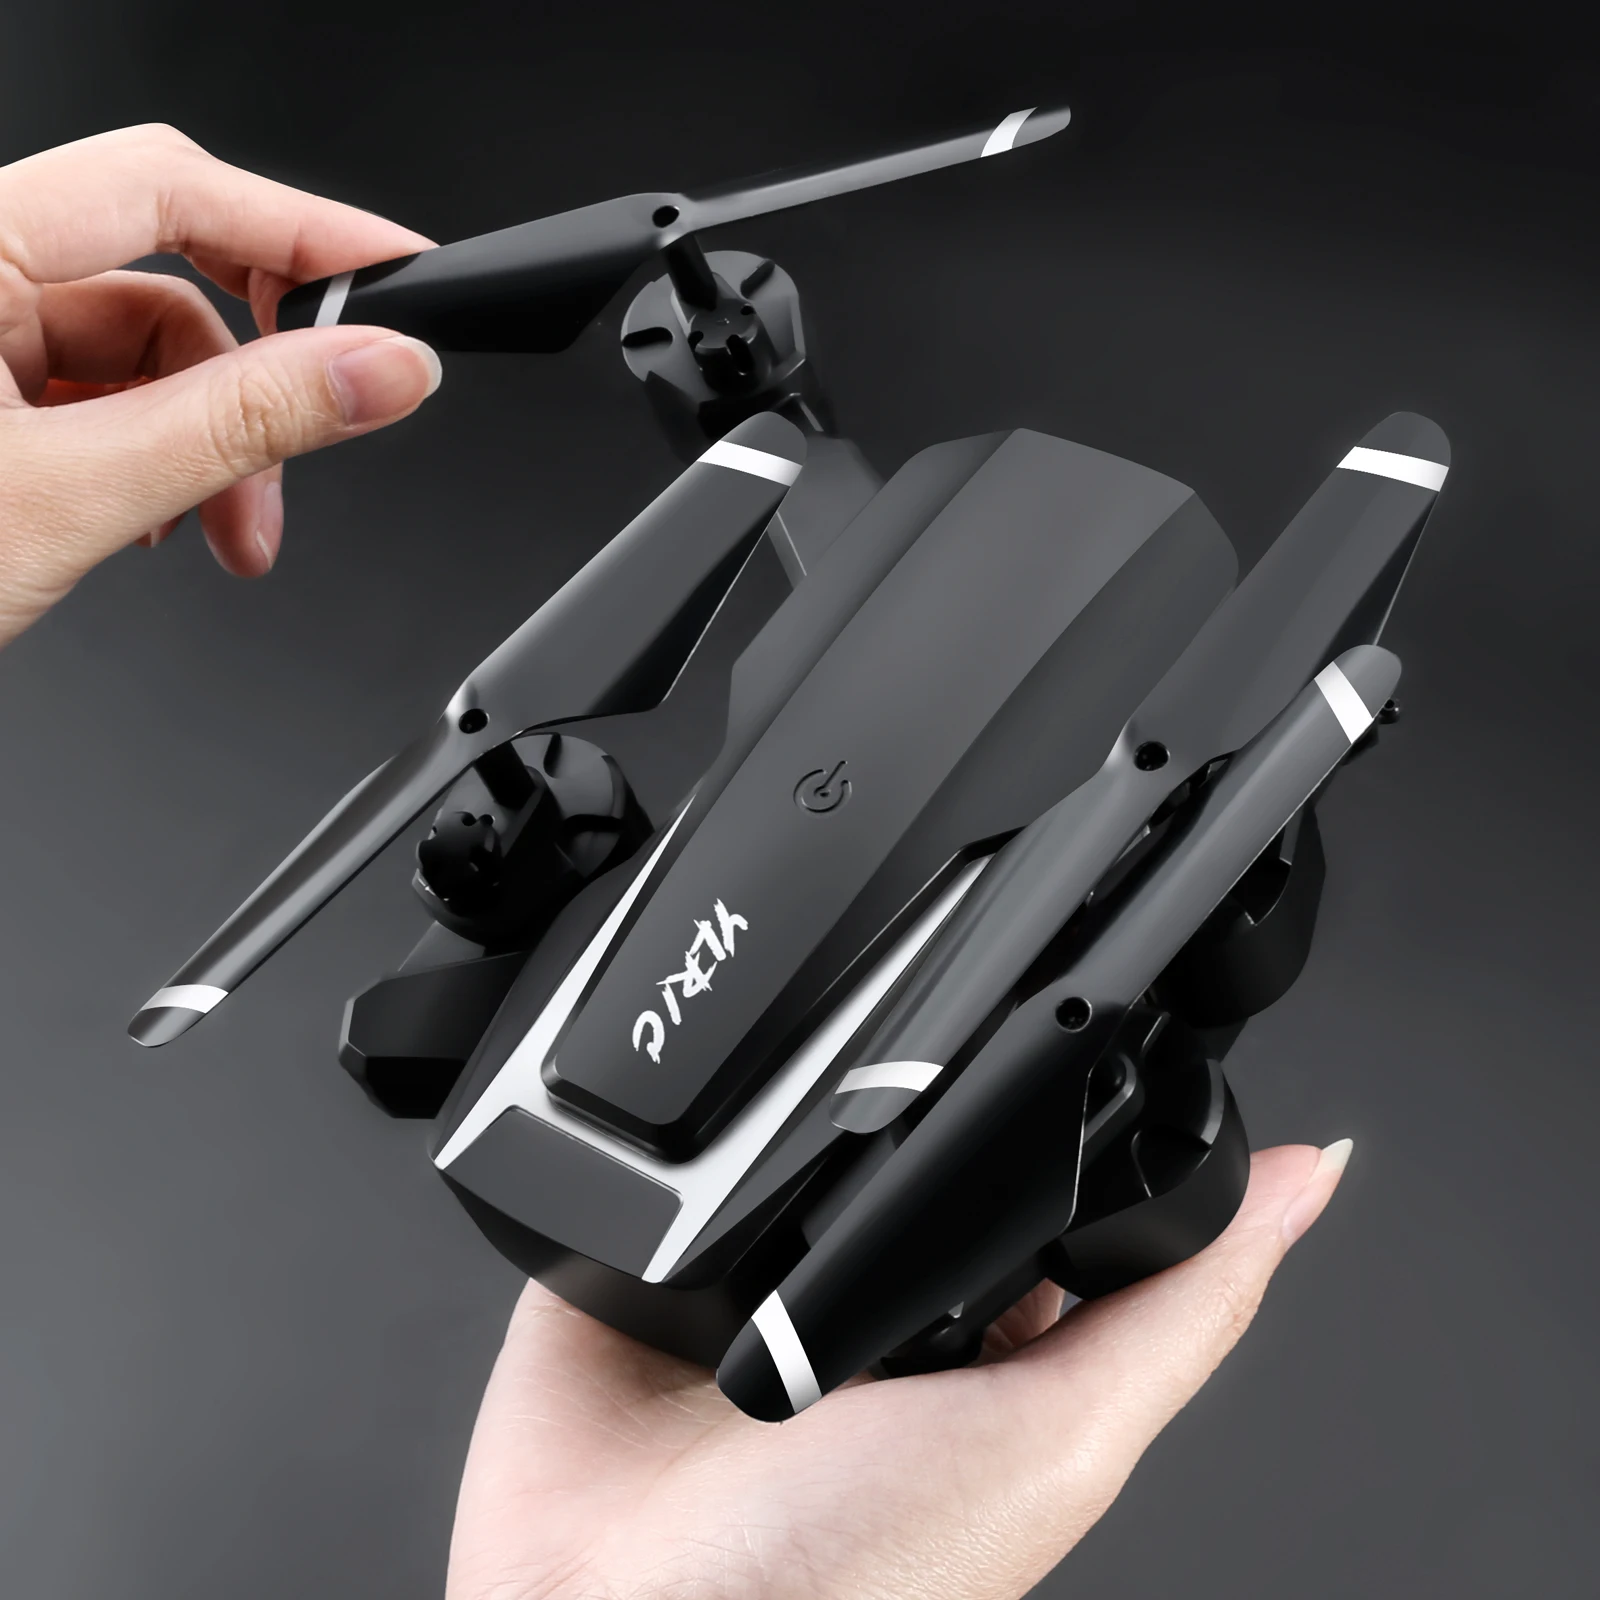 S90 Drone 4K Profession HD Wide Angle Camera with ESC Aerial Photography Quadcopter Remote Control Aircraft Toy RC FPV Drone enlarge